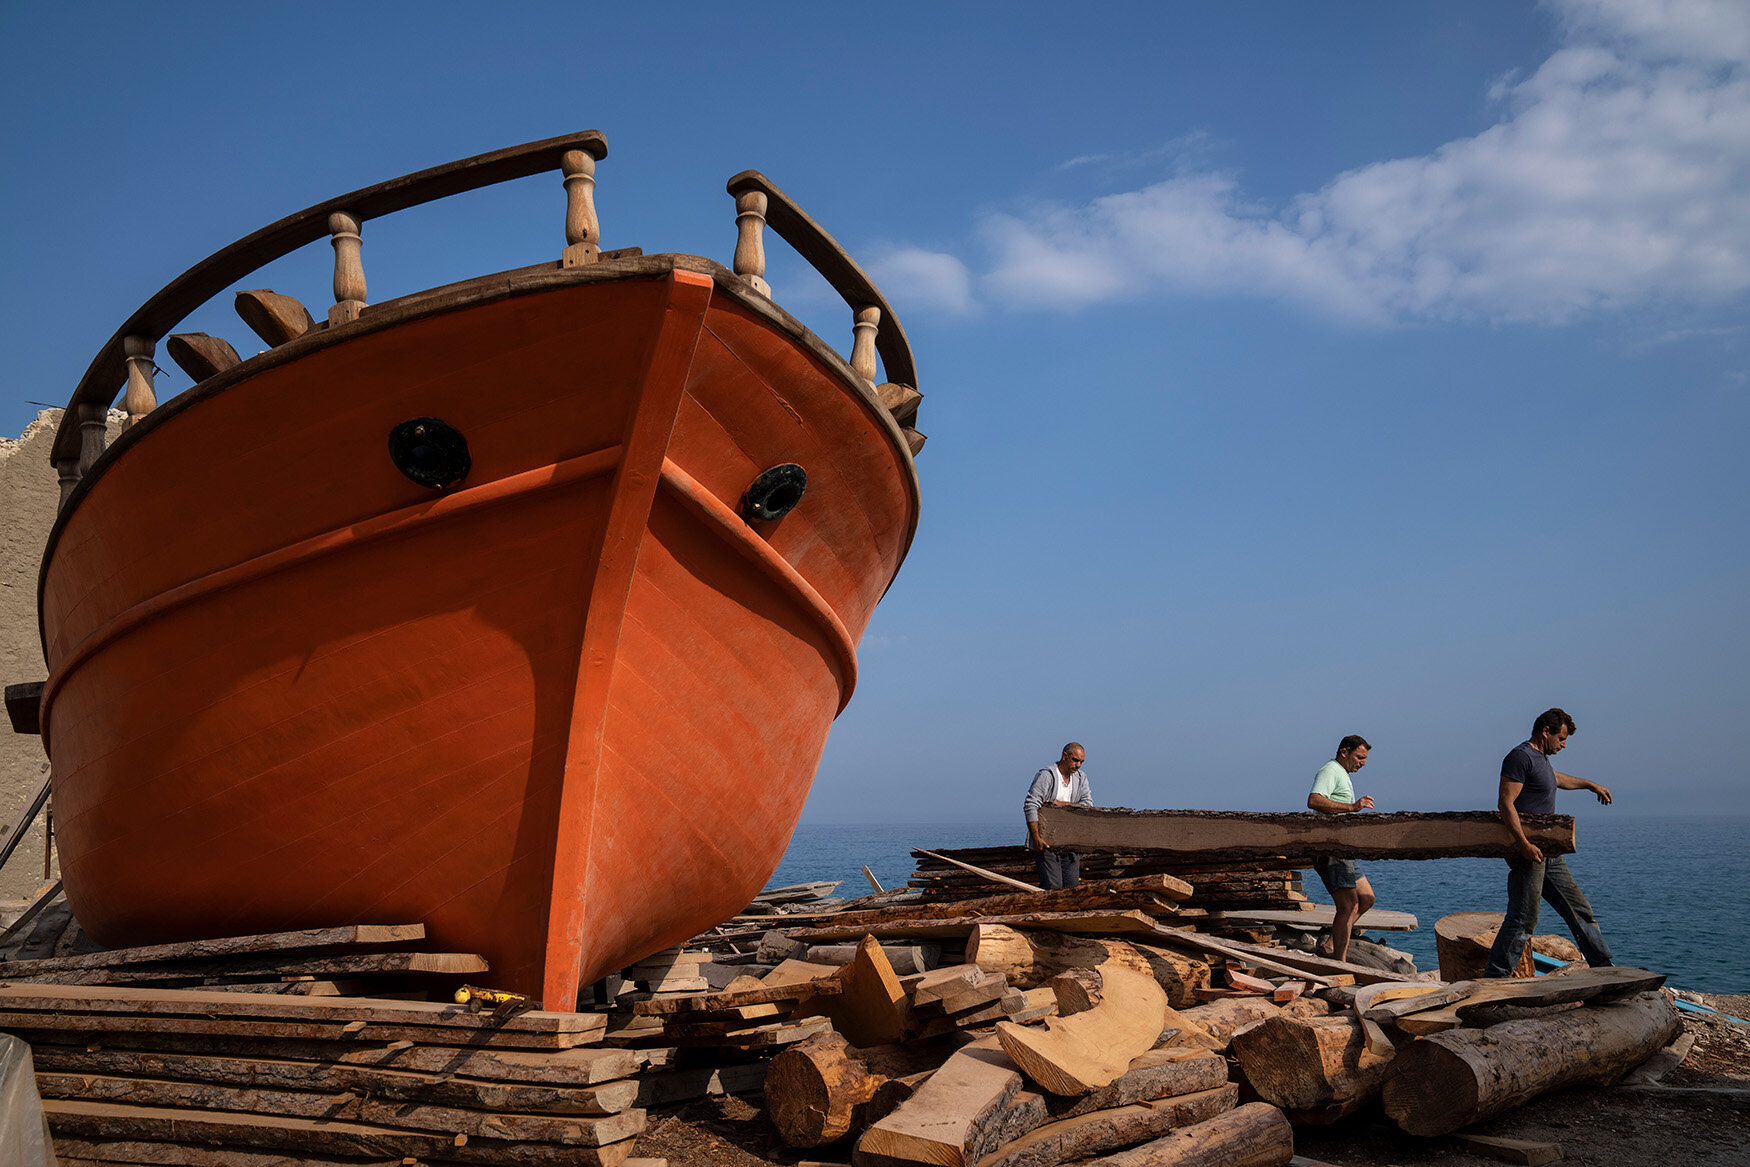 Greek traditional wooden boat builders a dwindling craft — AP Photos